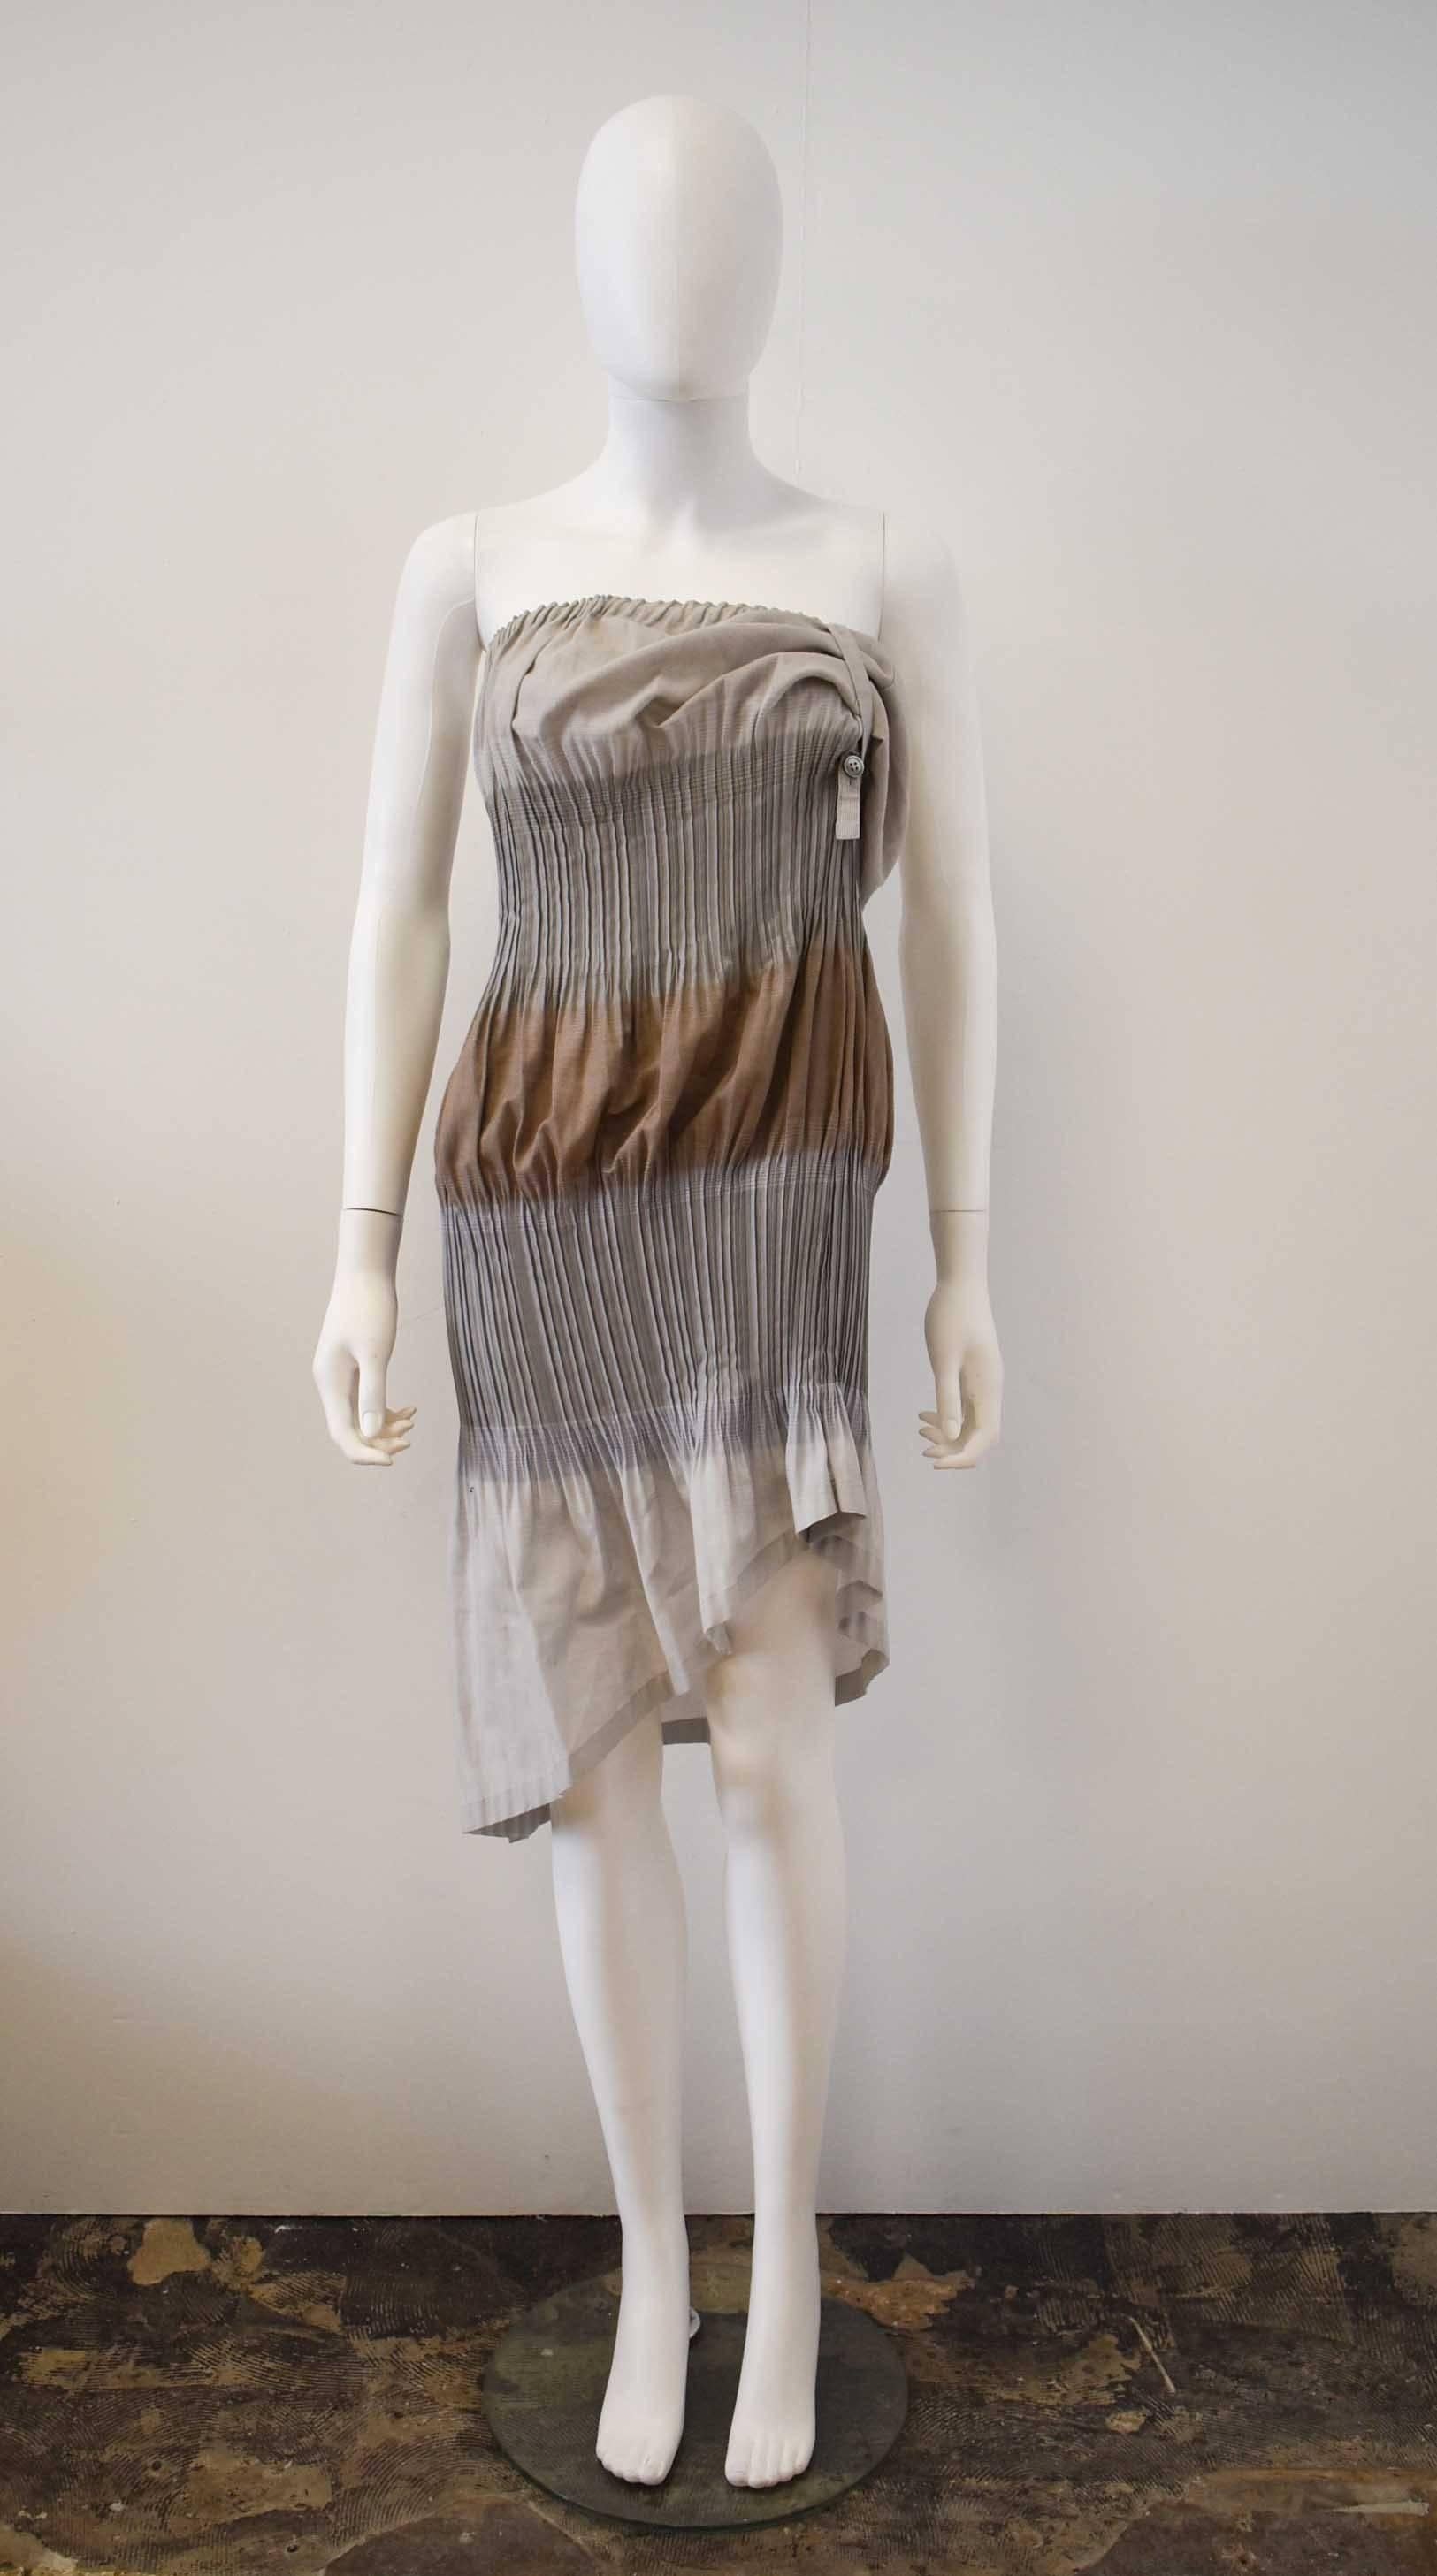 A quirky and unusual dress by innovative Japanese brand Issey Miyake. The dress has an elasticated waist and a subtle horizontally striped pattern to the fabric, creating bands of colour from grey to brown. Following this banded colour pattern, the